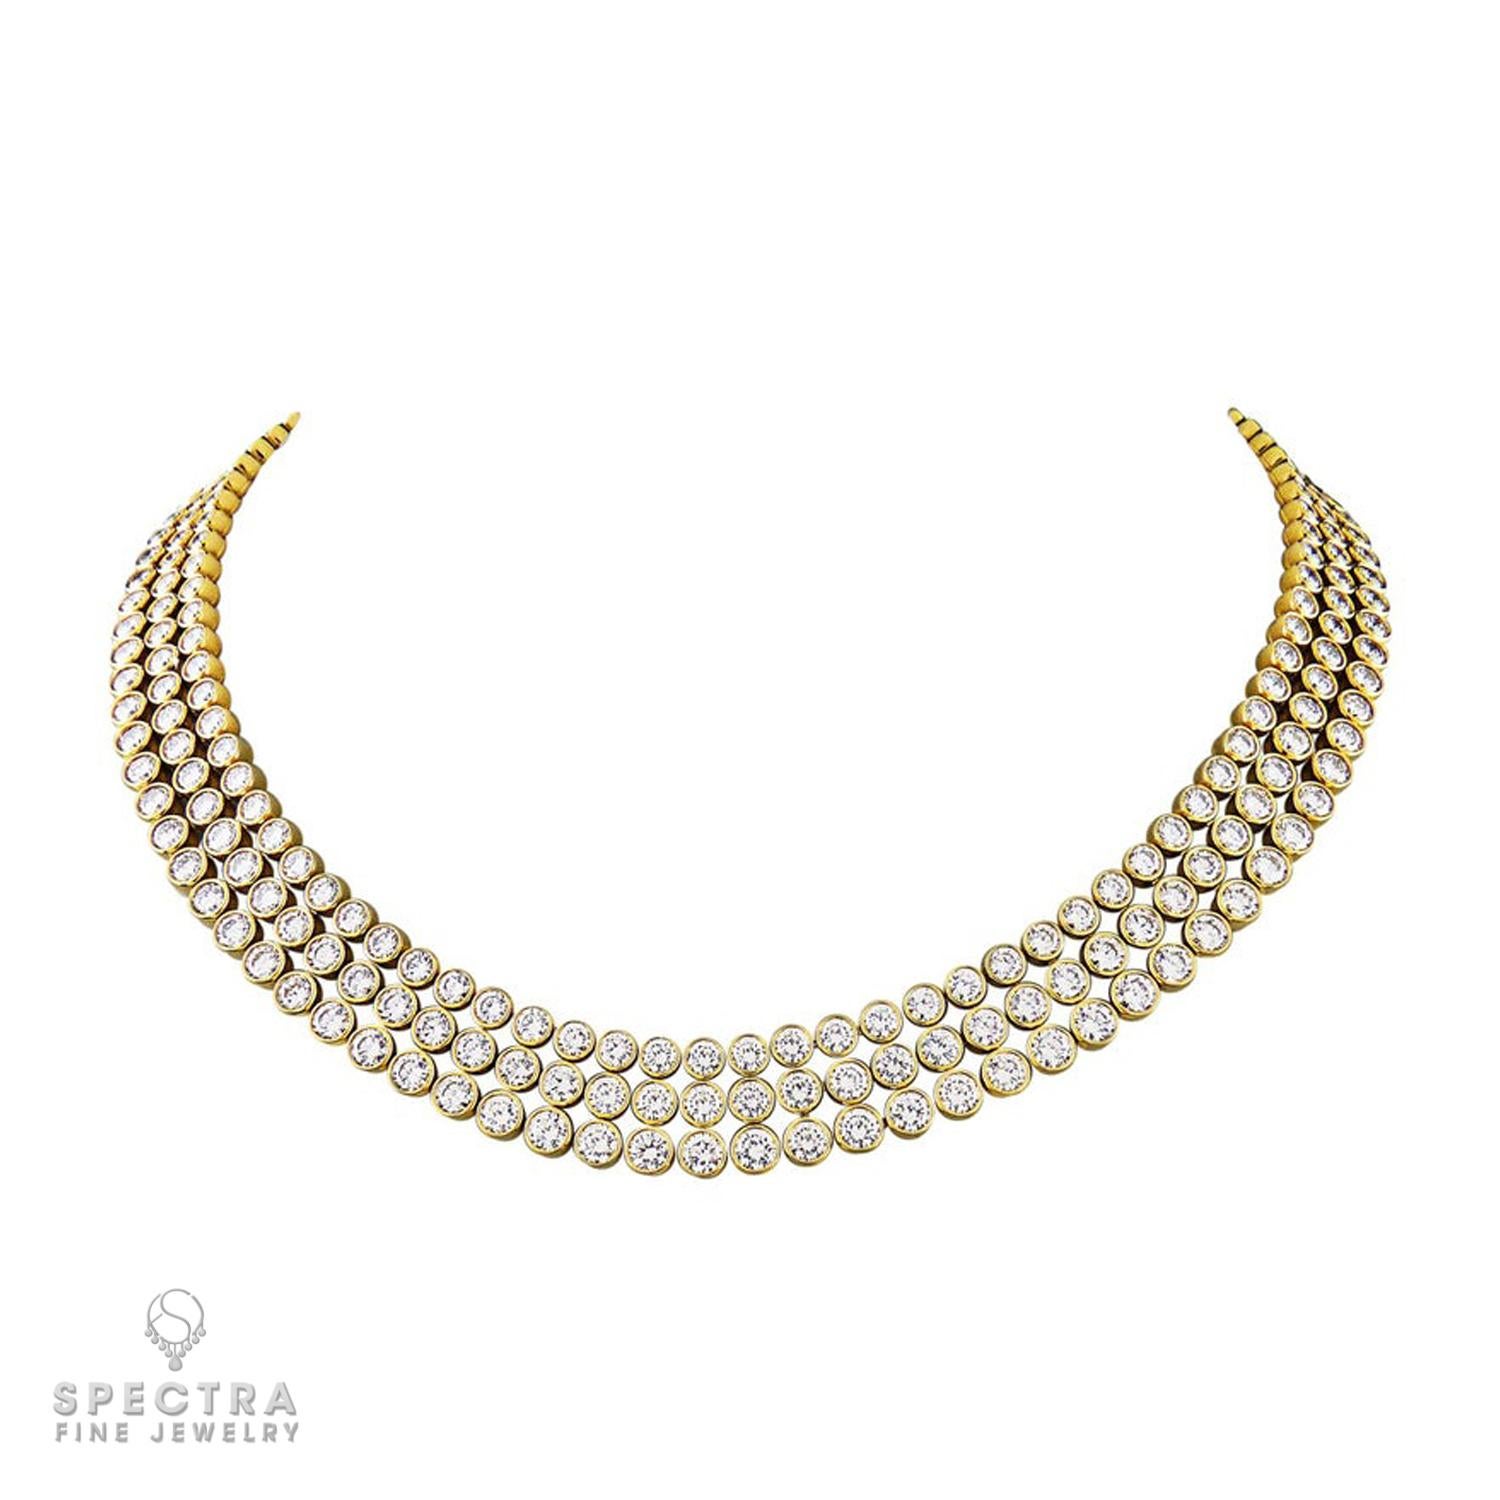 This understated yet grand Harry Winston Diamond 3-Row Riviere Necklace, made in the late XX century, is crafted in 18K yellow gold and features 282 round brilliant bezel-set diamonds with an estimated total weight of 68 carats of E-F color and VVS